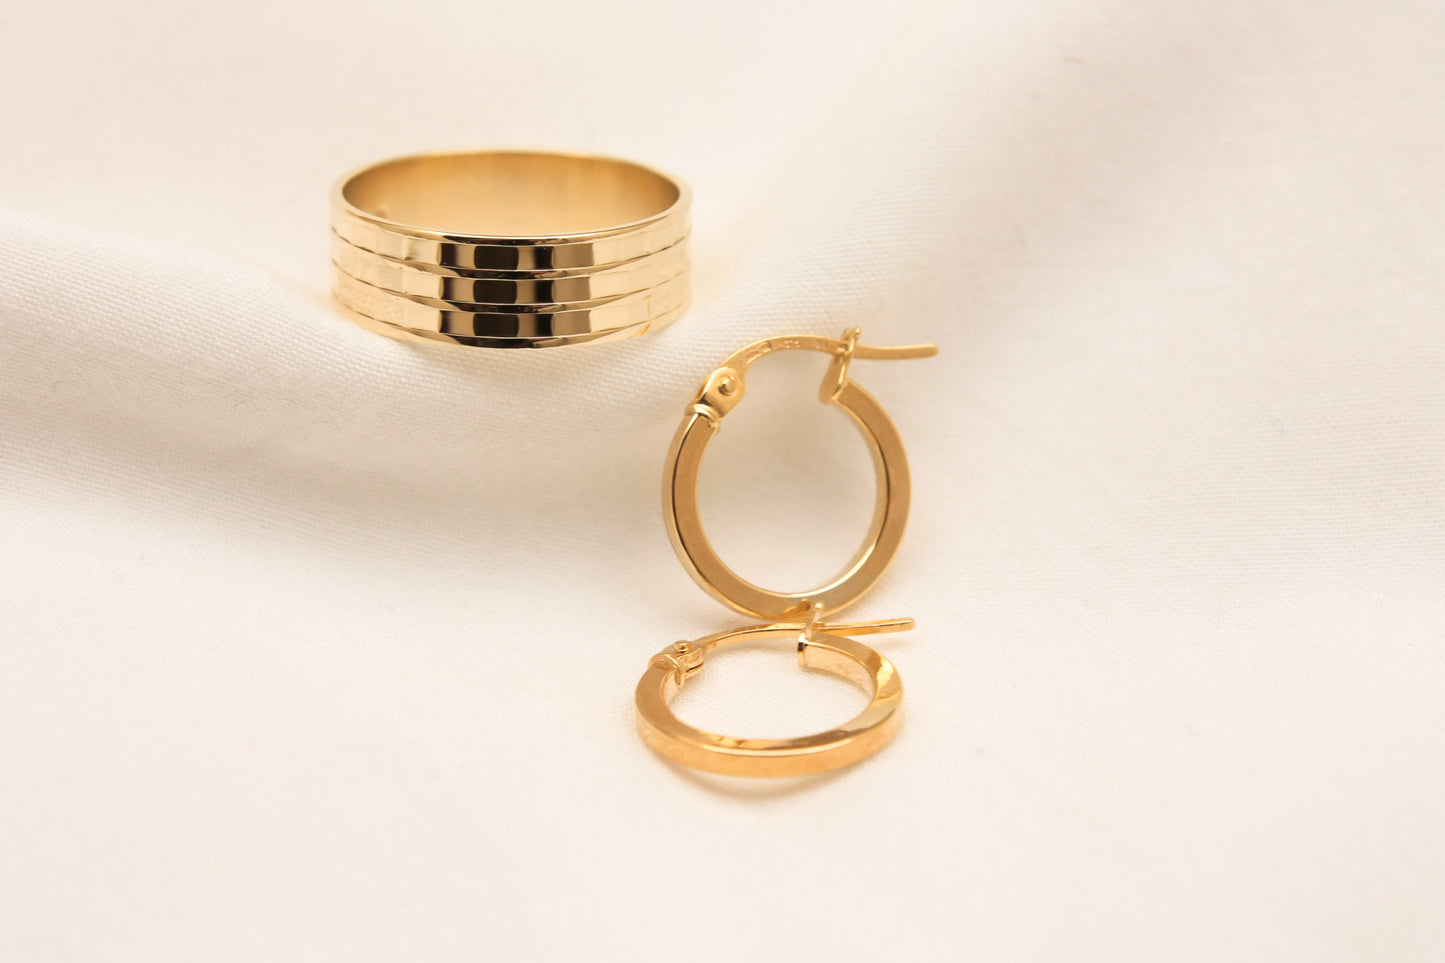 gold ring and gold hoop earrings. wedding band and earrings 